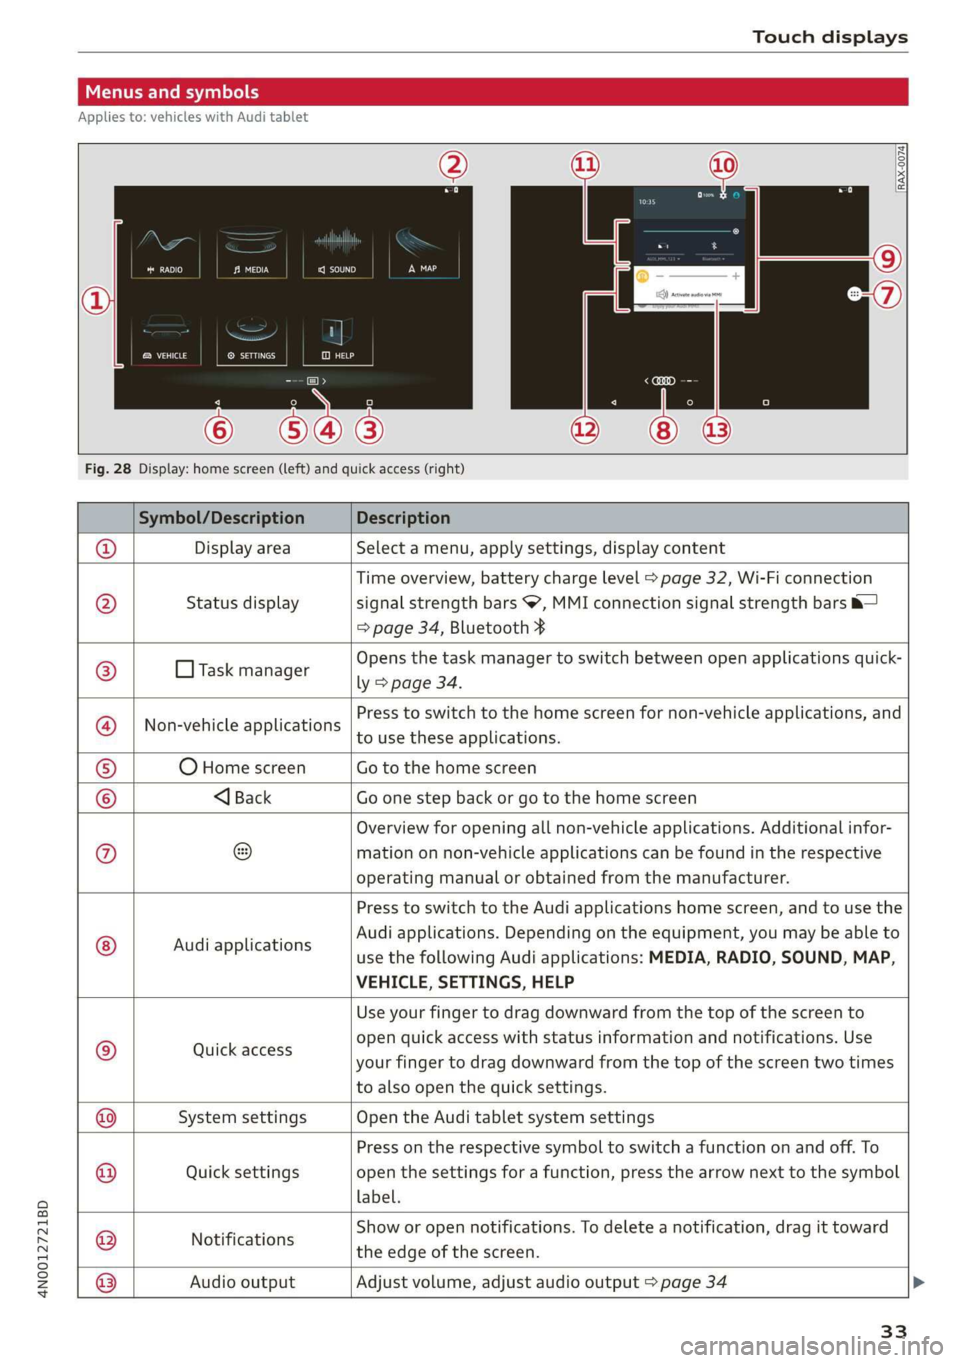 AUDI A8 2020 Owners Guide 4N0012721BD 
Touch displays 
  
Menus and symbols   
Applies to: vehicles with Audi tablet 
  
emsa || | cea 
Rats ® SETTINGS 
  
Cy 
  
  
  
  
  
Fig. 28 Display: home screen (left) and quick acce